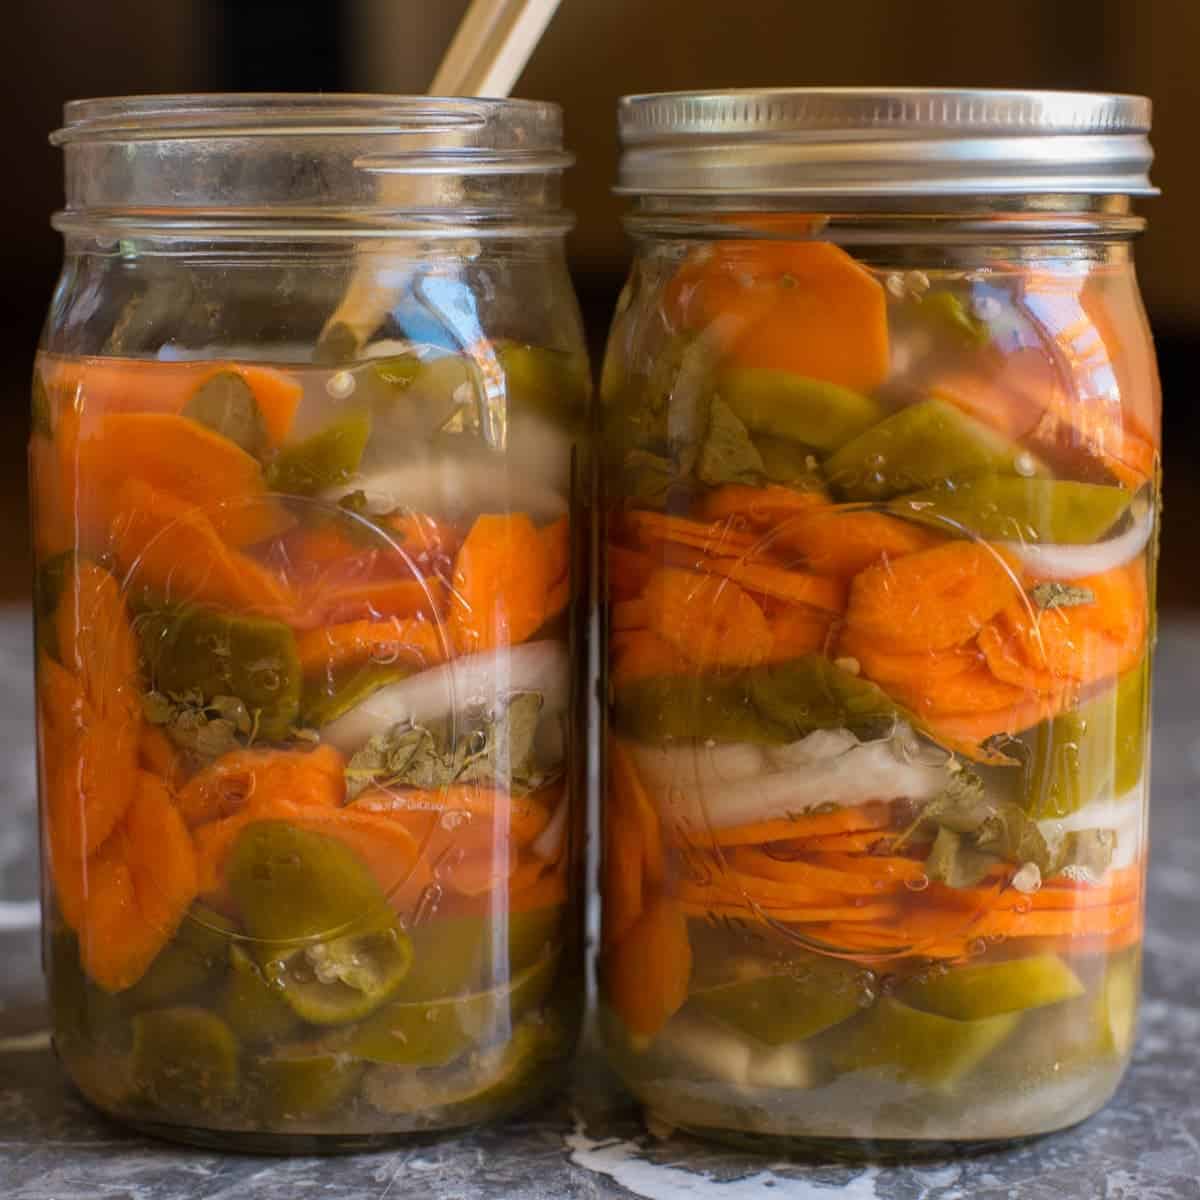 Homemade Fermented Spicy Carrots with Jalapeños